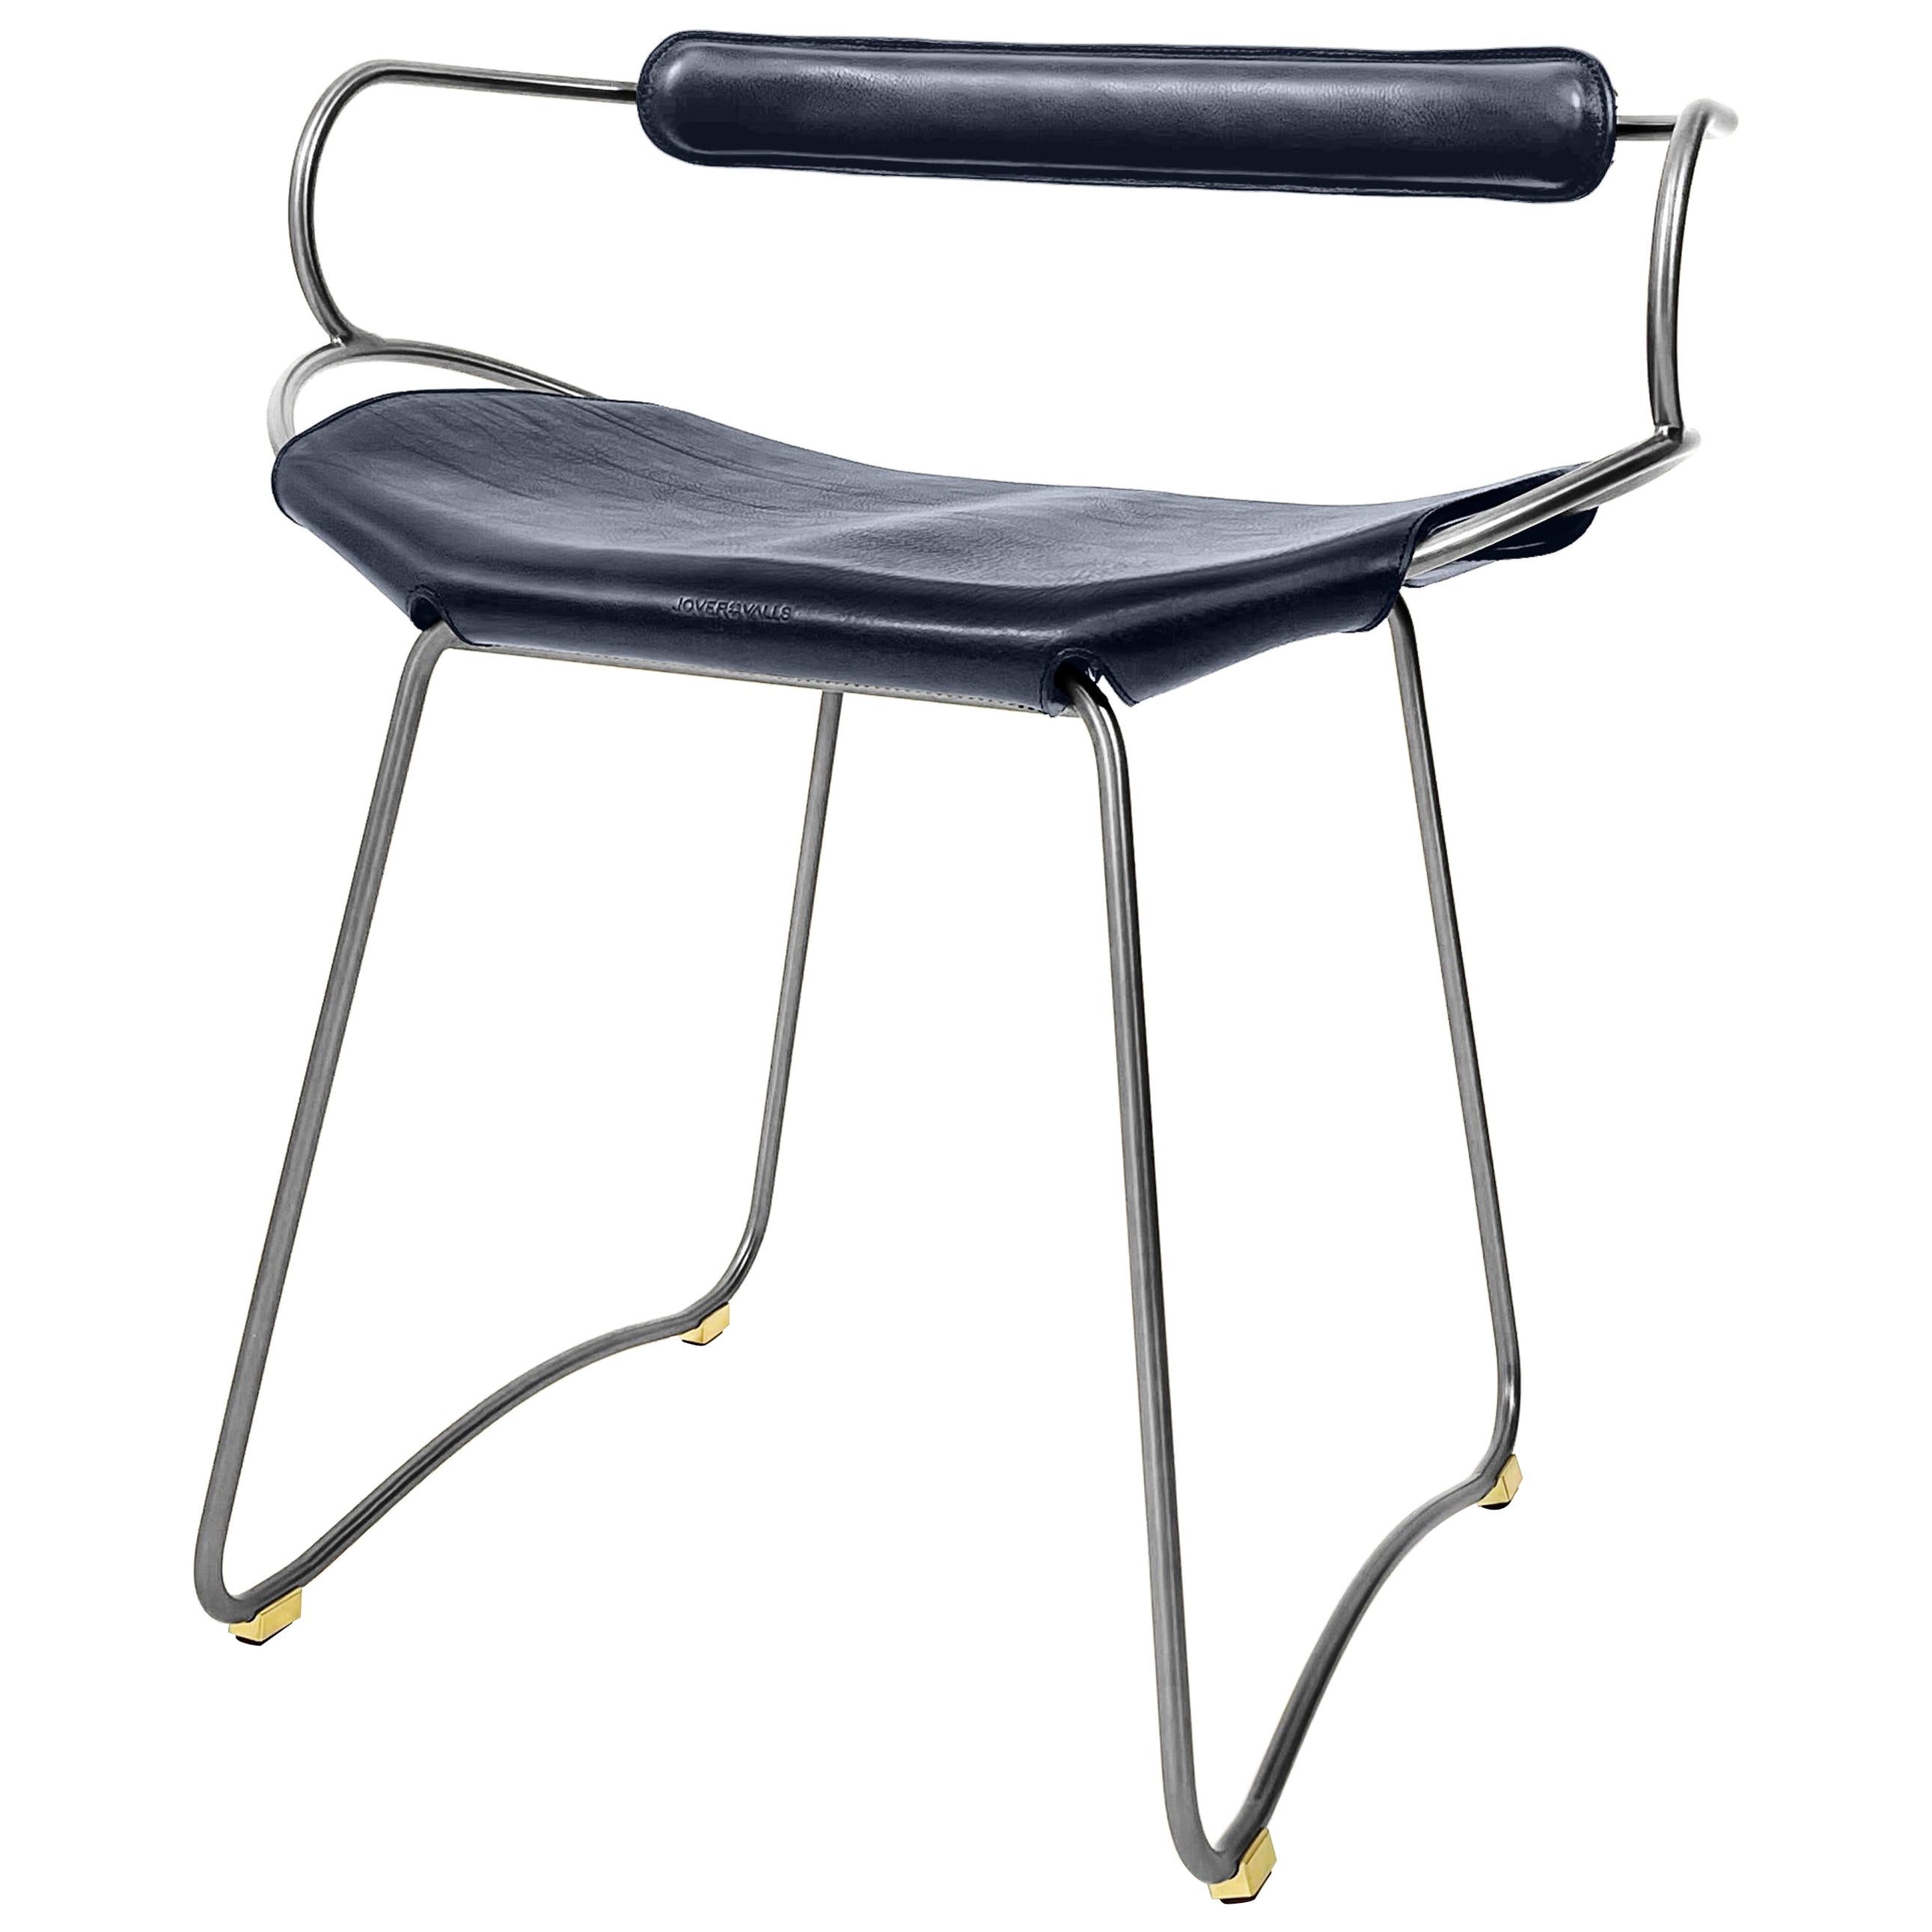 Chair / Table Height Stool w. Backrest Old Silver Steel & Navy Blue Leather For Sale